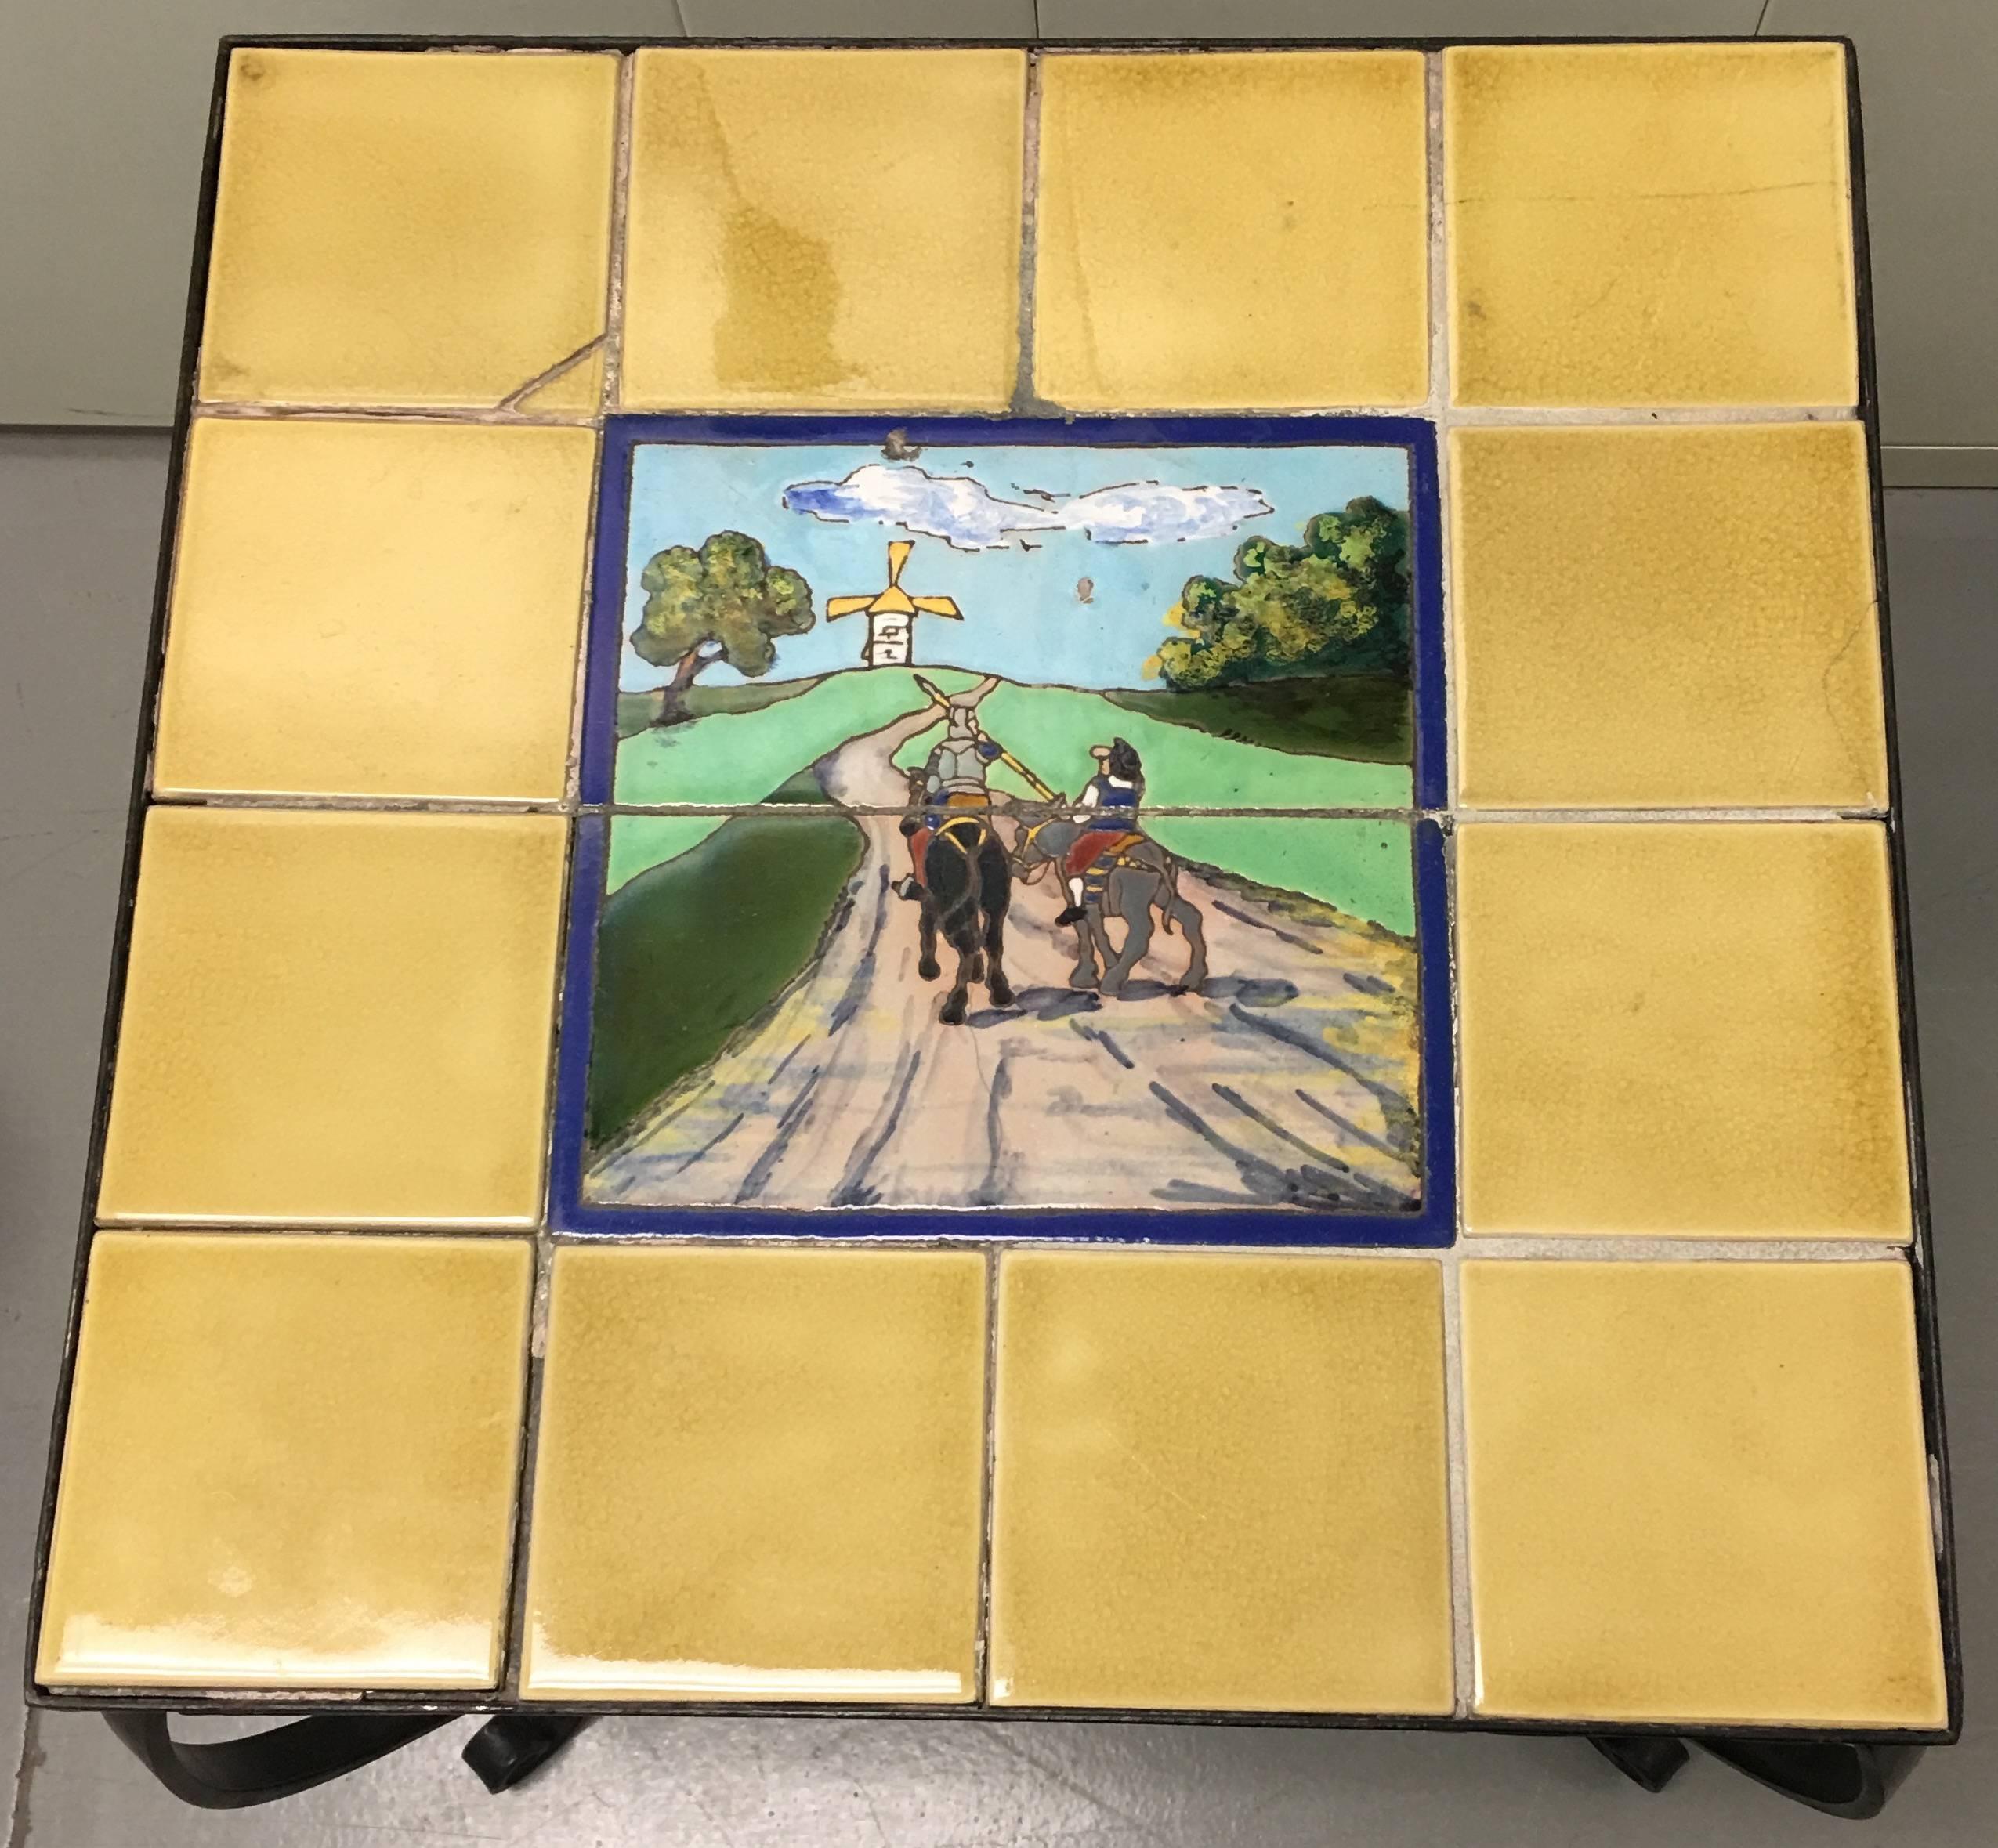 1930s Spanish tile-top wrought iron side table. Ceramic tiles depicting Don Quixote and the Windmill. Black wrought iron table base.